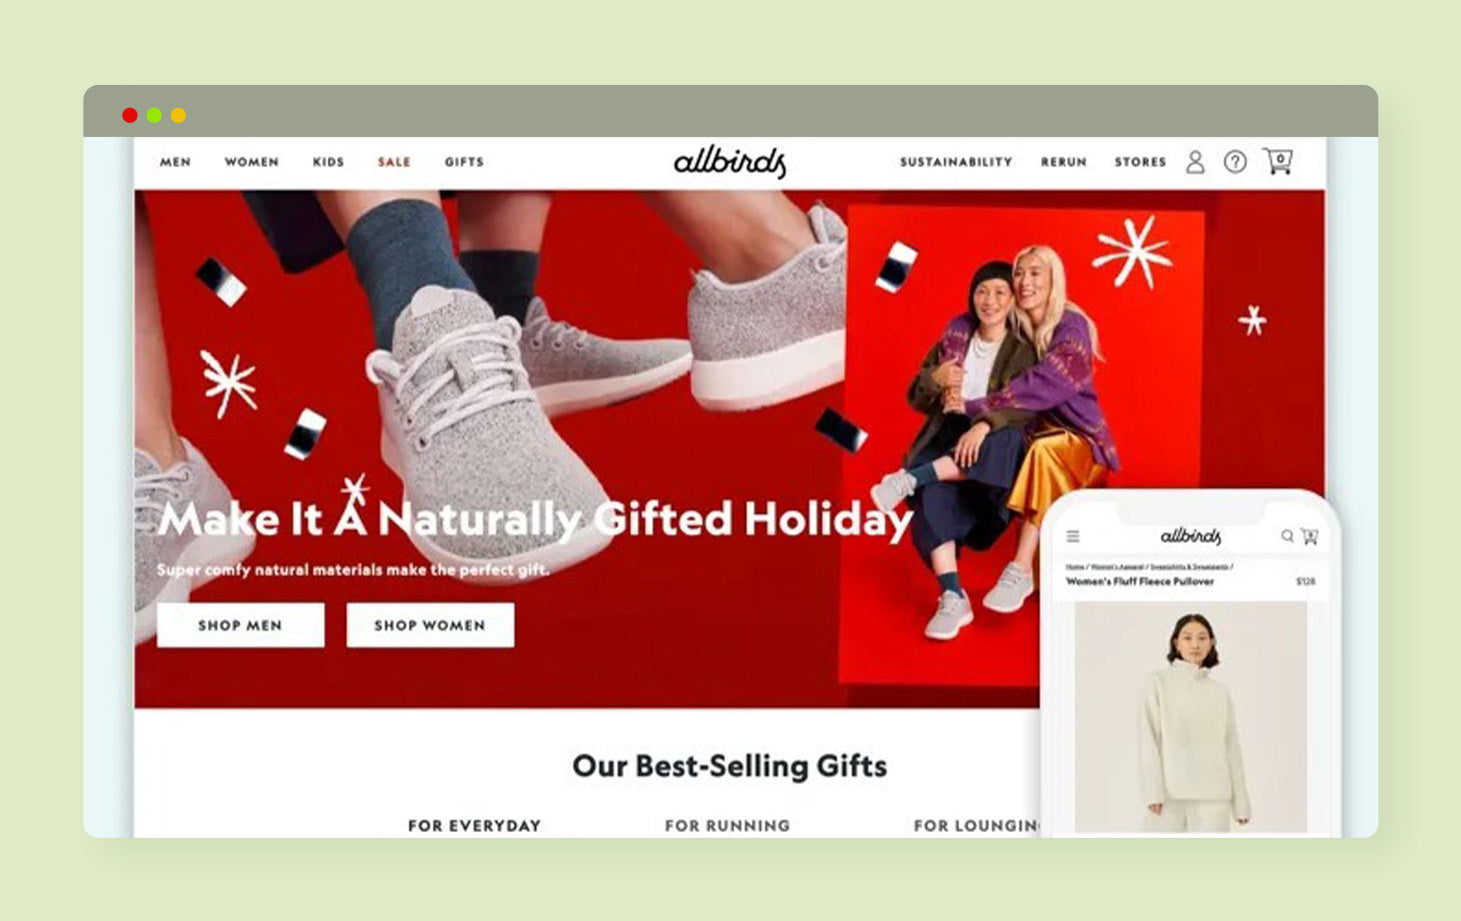 Shopify Checkout Customization Tips for Holiday Season Success - Shopify Checkout Customization : 11 Tips To Craft a Seamless Holiday Experience - Infuse Festive Branding